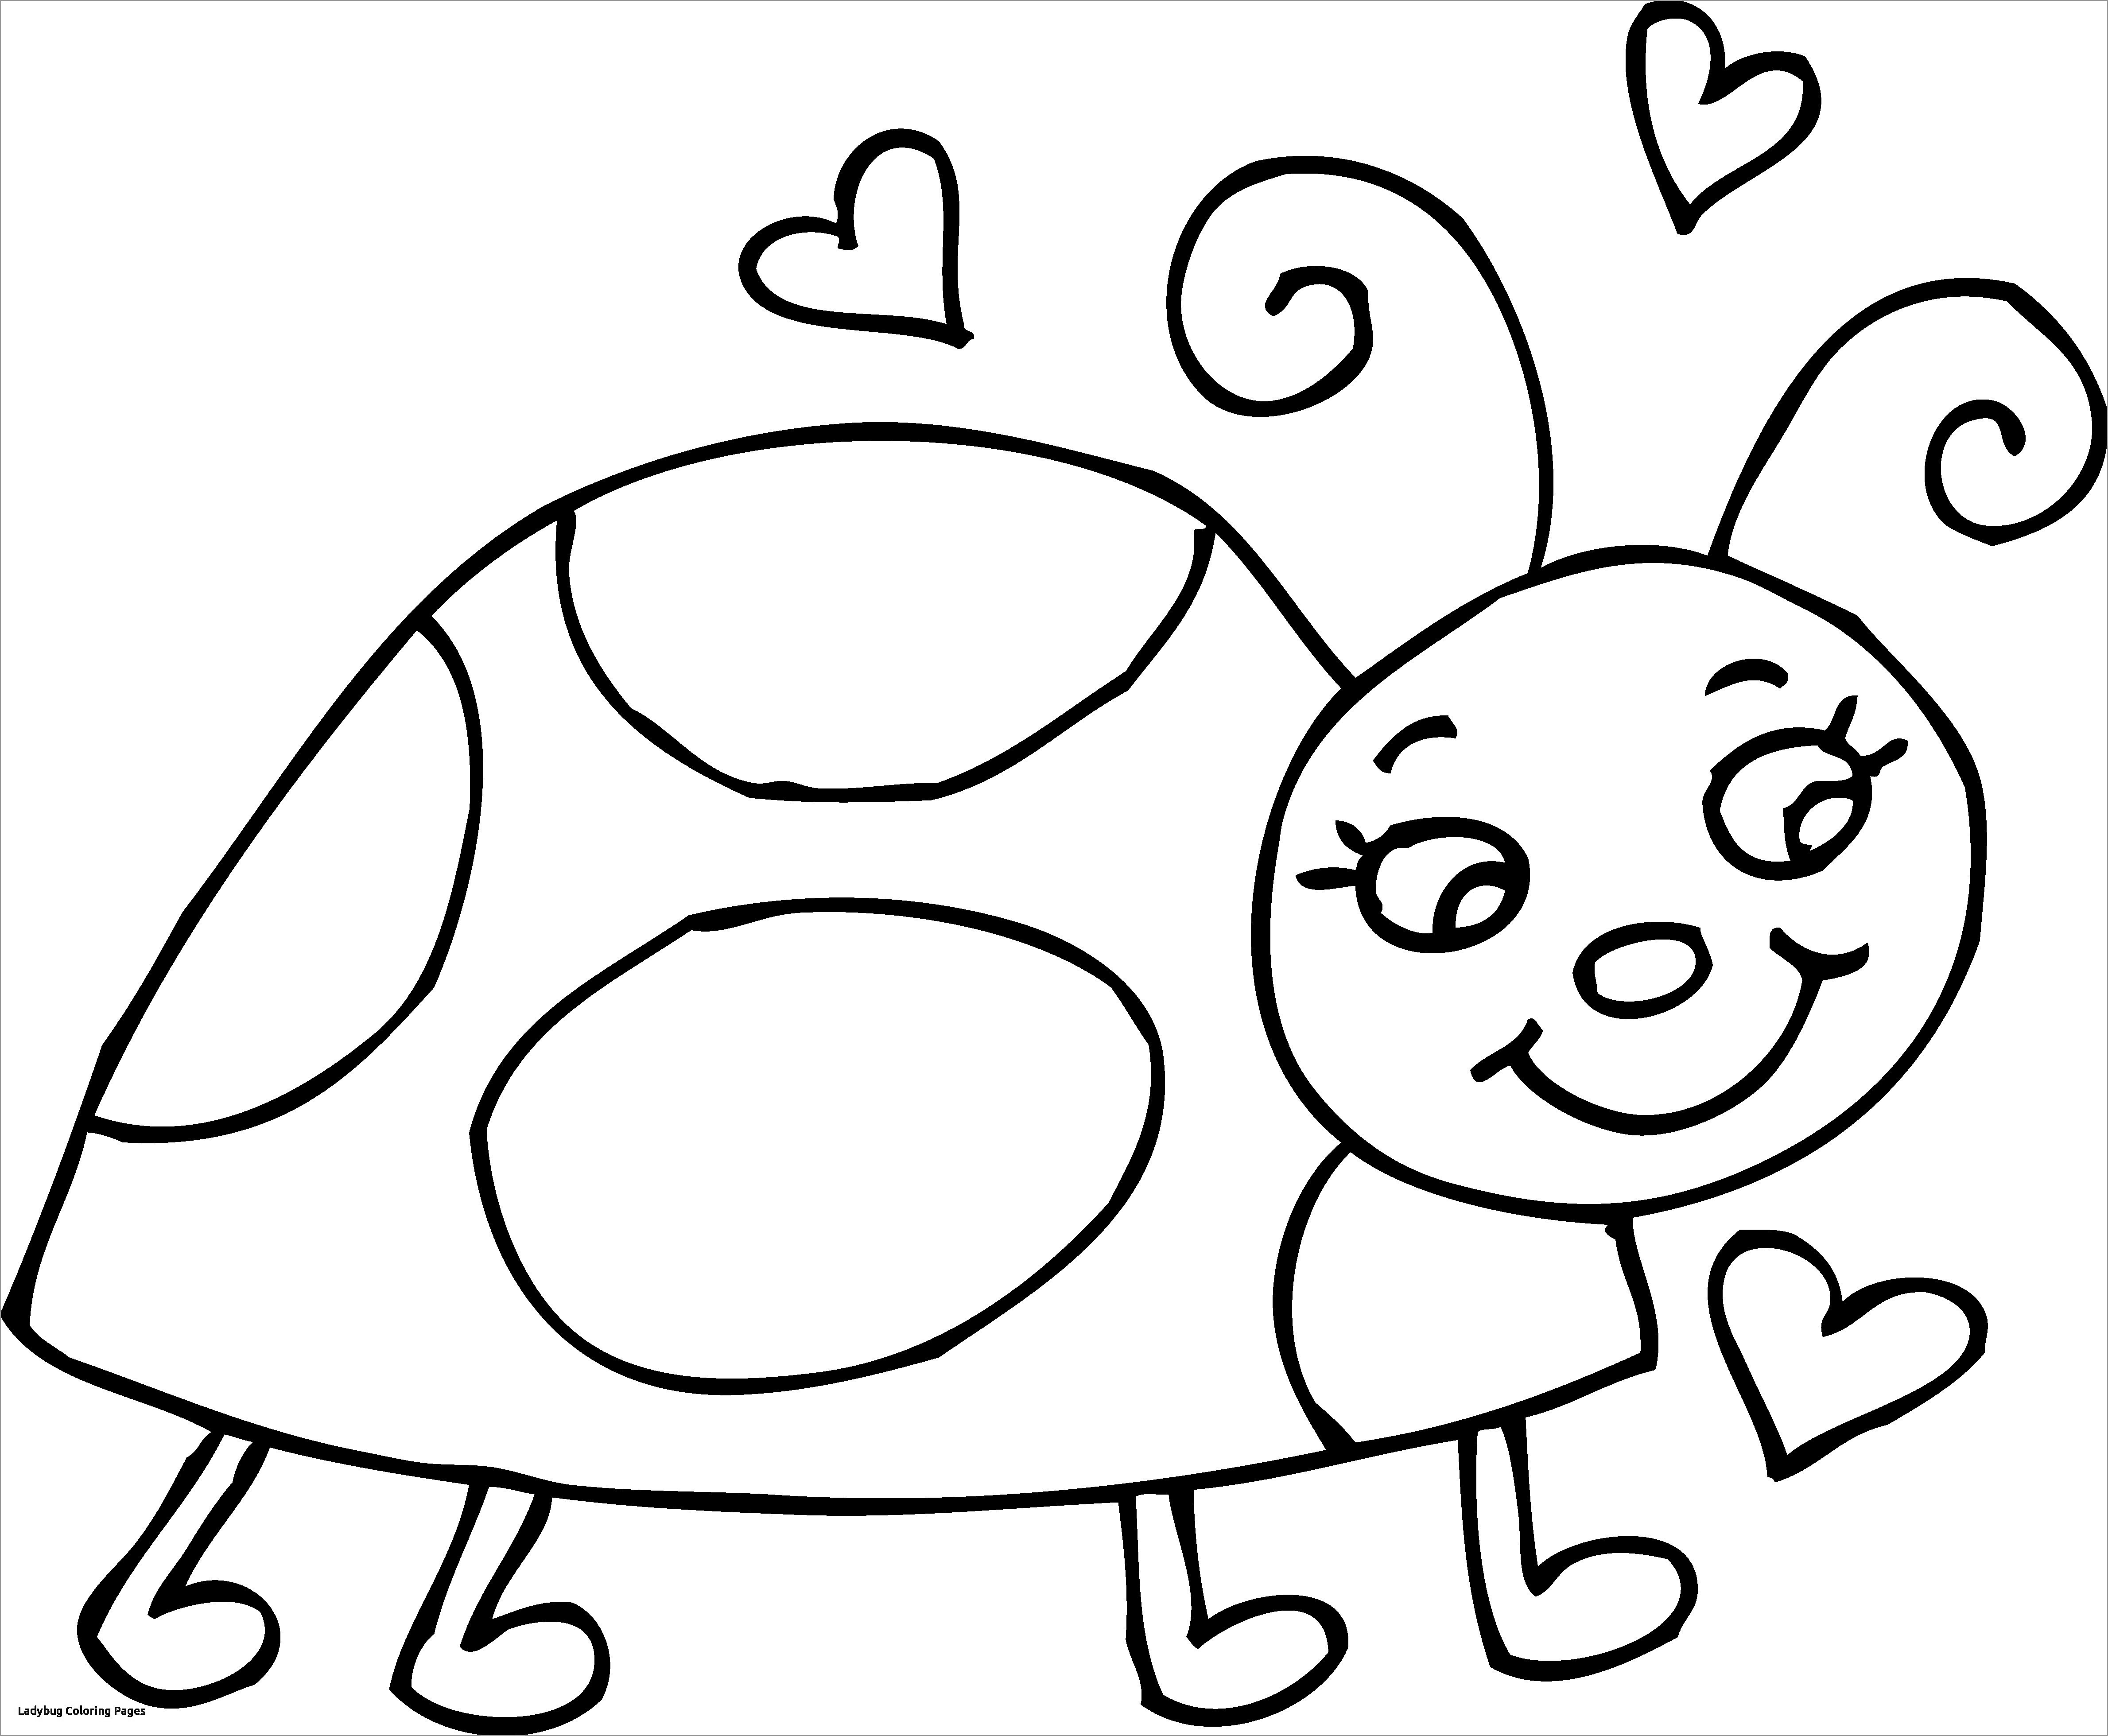 Cute Ladybug Coloring Page for Kids   ColoringBay